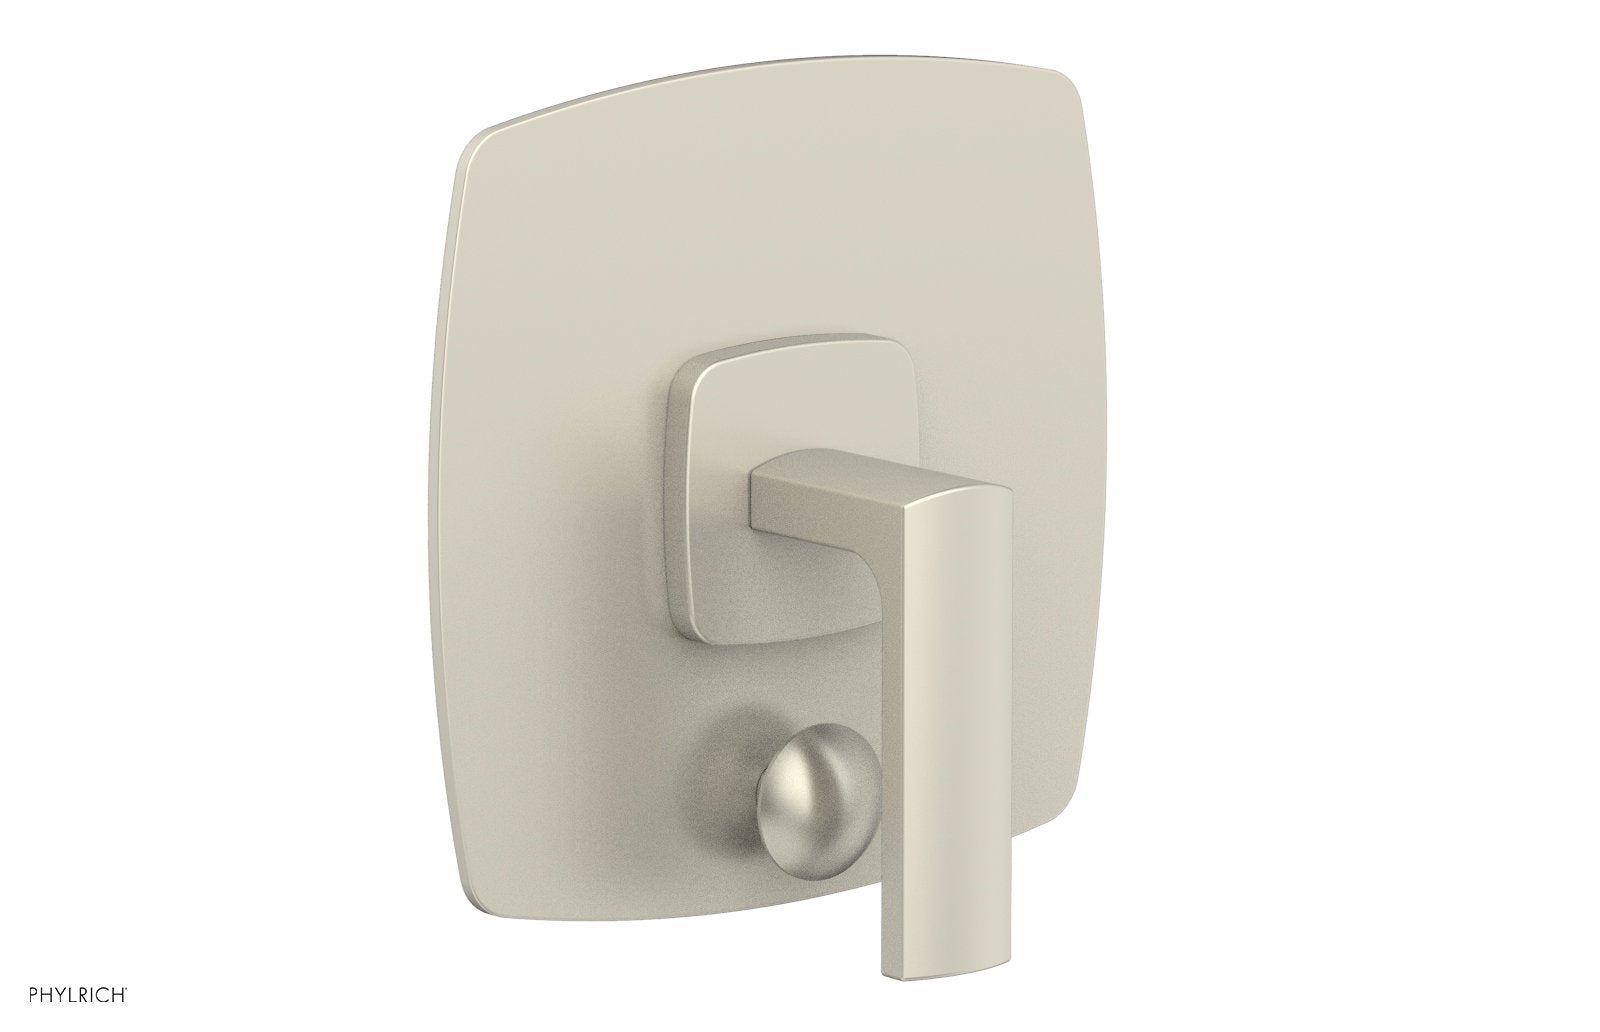 Phylrich RADI Pressure Balance Shower Plate with Diverter and Handle Trim Set